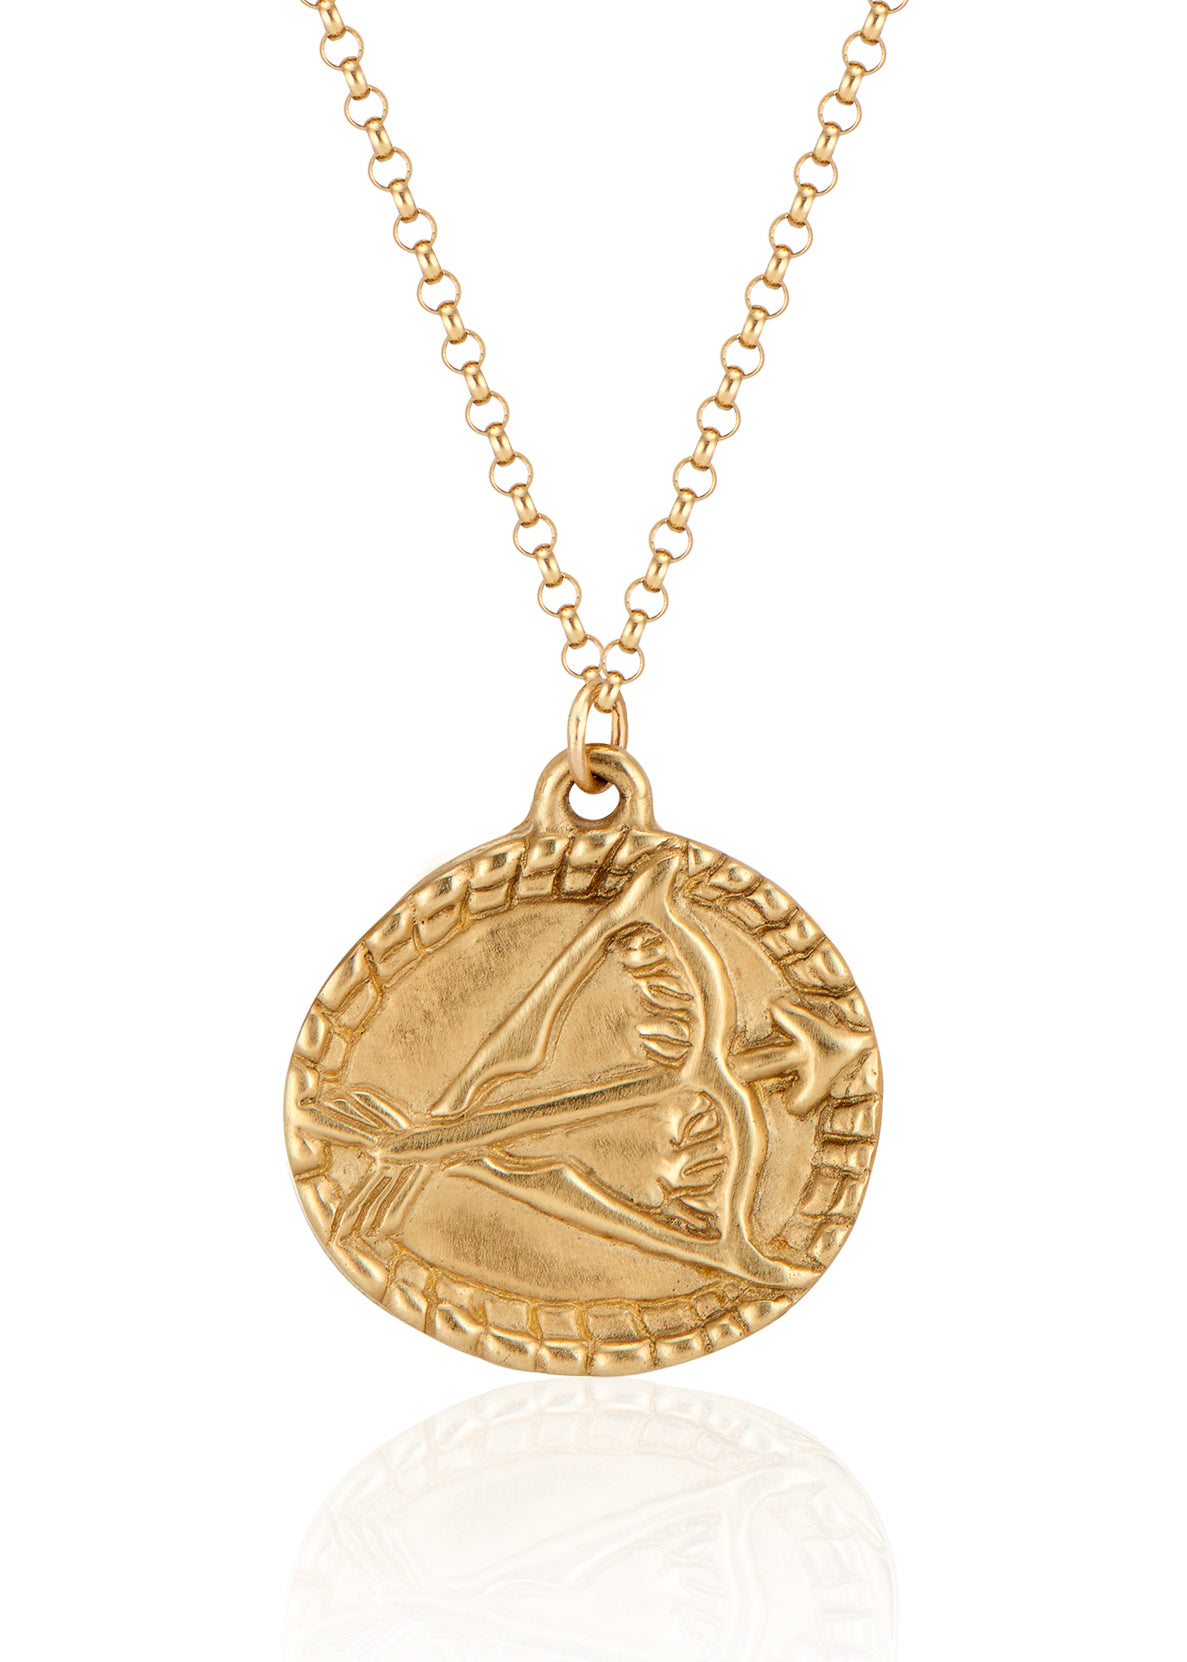 The ninth sign of the Zodiac, fire sign Sagittarius is a passionate traveler whose natural curiosity ignites their adventures. A hand-carved bow and arrow graces this pendant for a necklace that captures the power of the celestial sky.